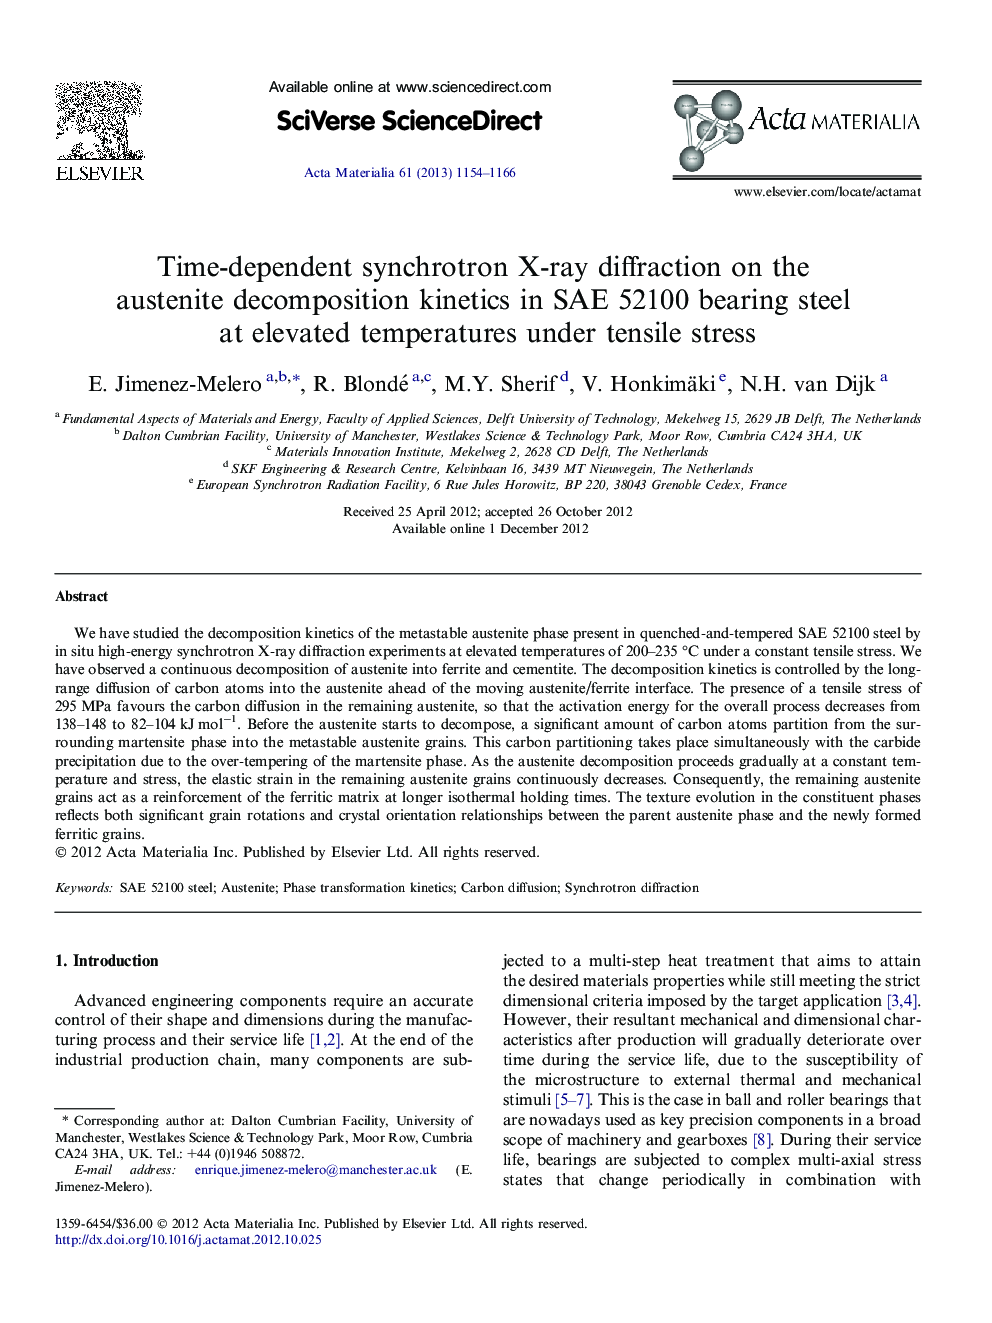 Time-dependent synchrotron X-ray diffraction on the austenite decomposition kinetics in SAE 52100 bearing steel at elevated temperatures under tensile stress